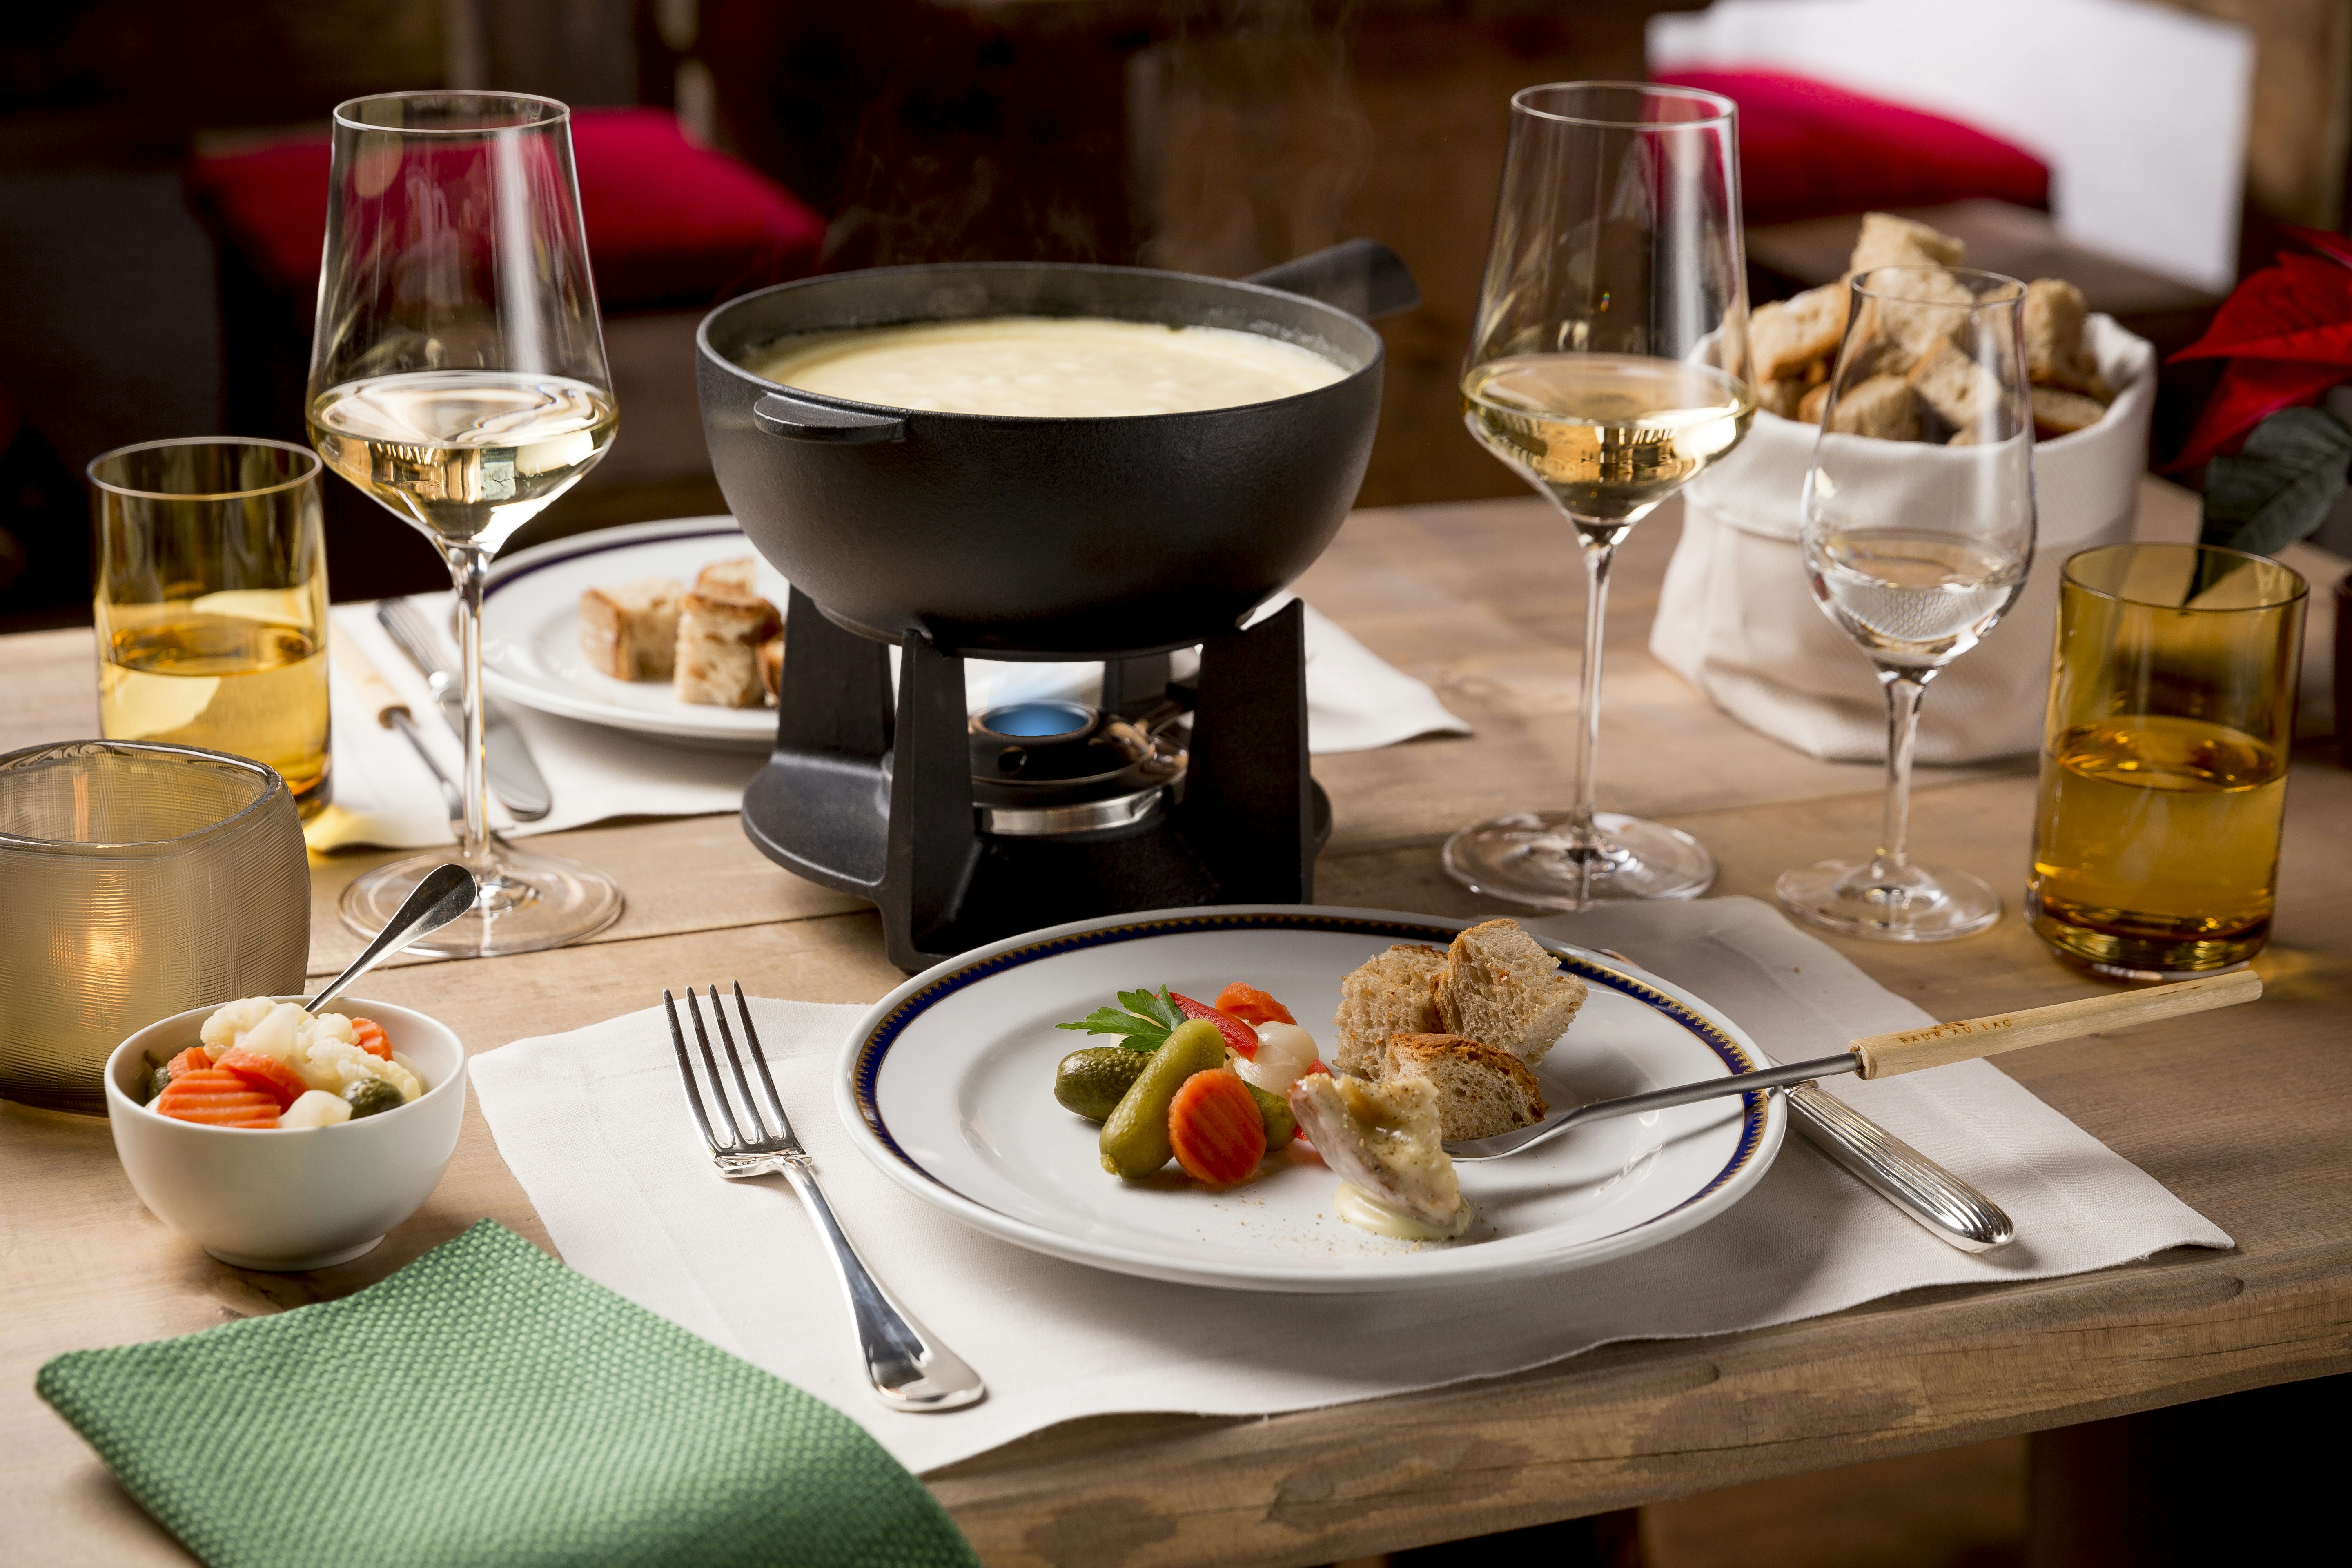 A table is laid with a cheese fondue, bread, vegetables, and glasses of white wine at Baur au Lac's Chalet au Lac.